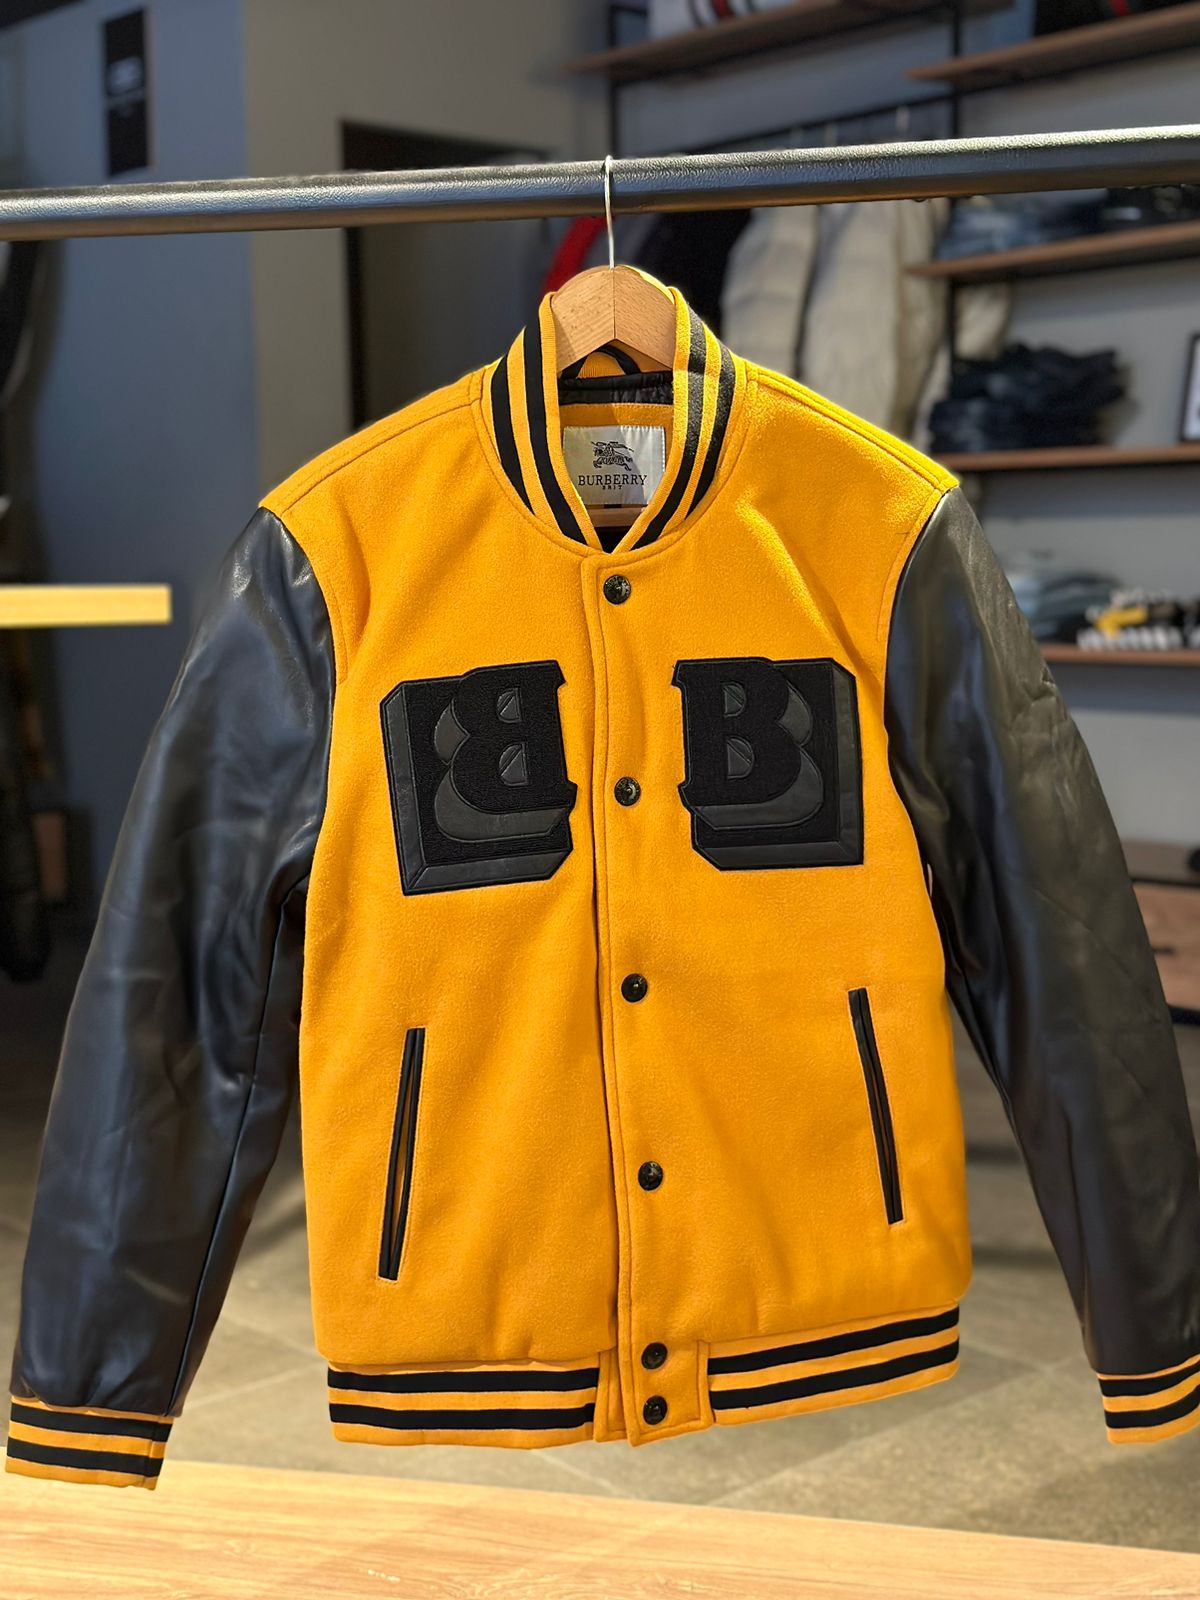 BURBERRY JACKET "Leather SLEEVES"